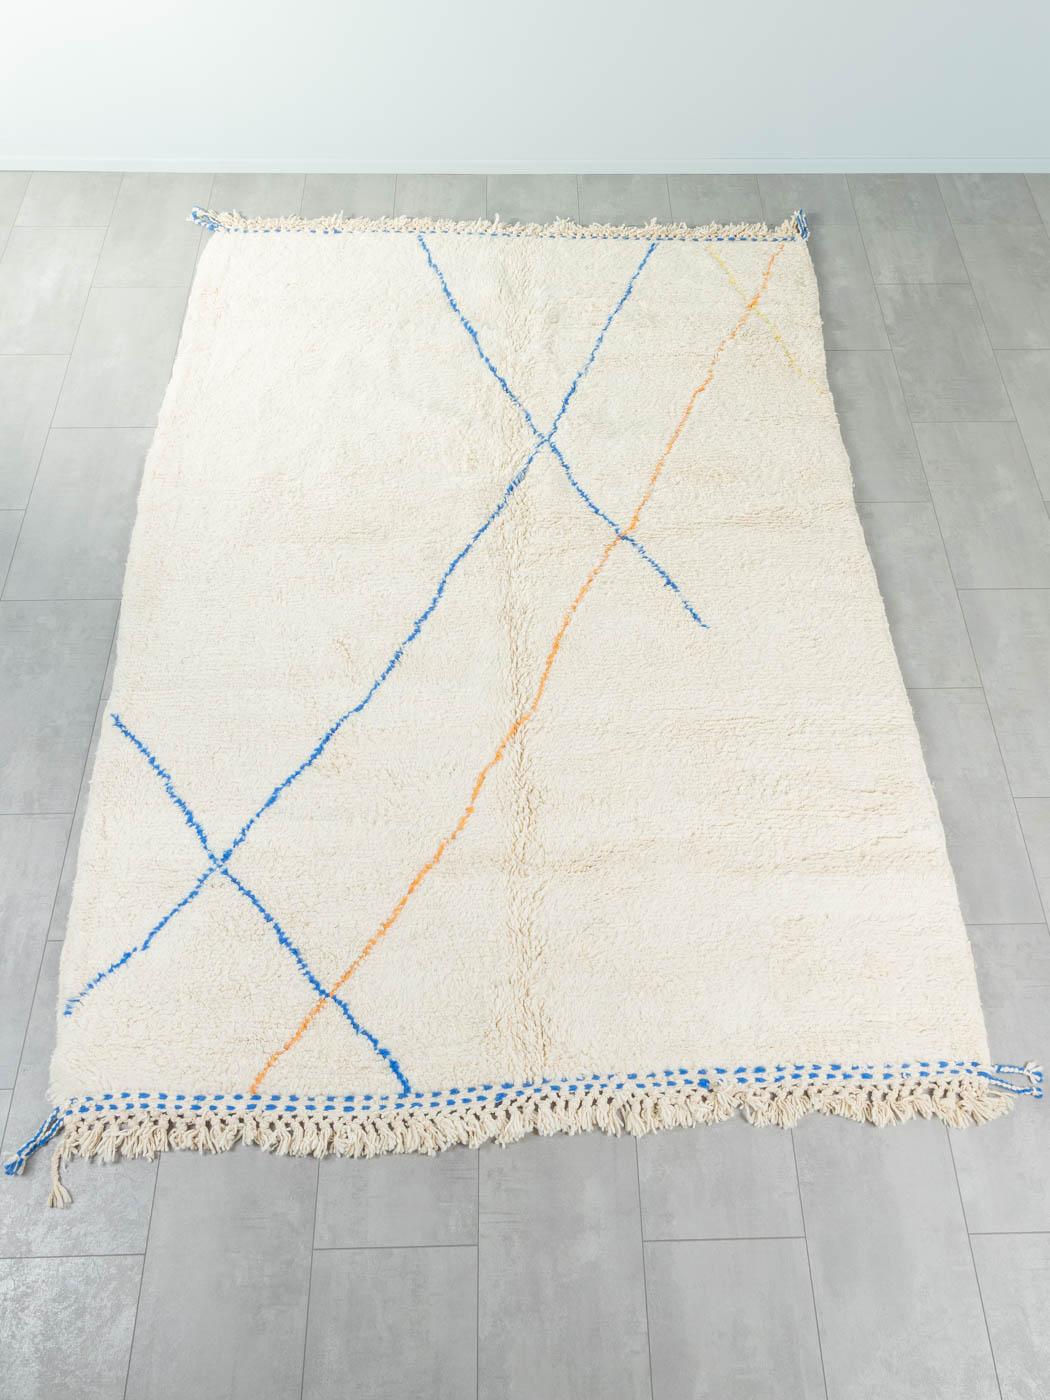 Get Together is a contemporary 100% wool rug – thick and soft, comfortable underfoot. Our Berber rugs are handwoven and handknotted by Amazigh women in the Atlas Mountains. These communities have been crafting rugs for thousands of years. One knot